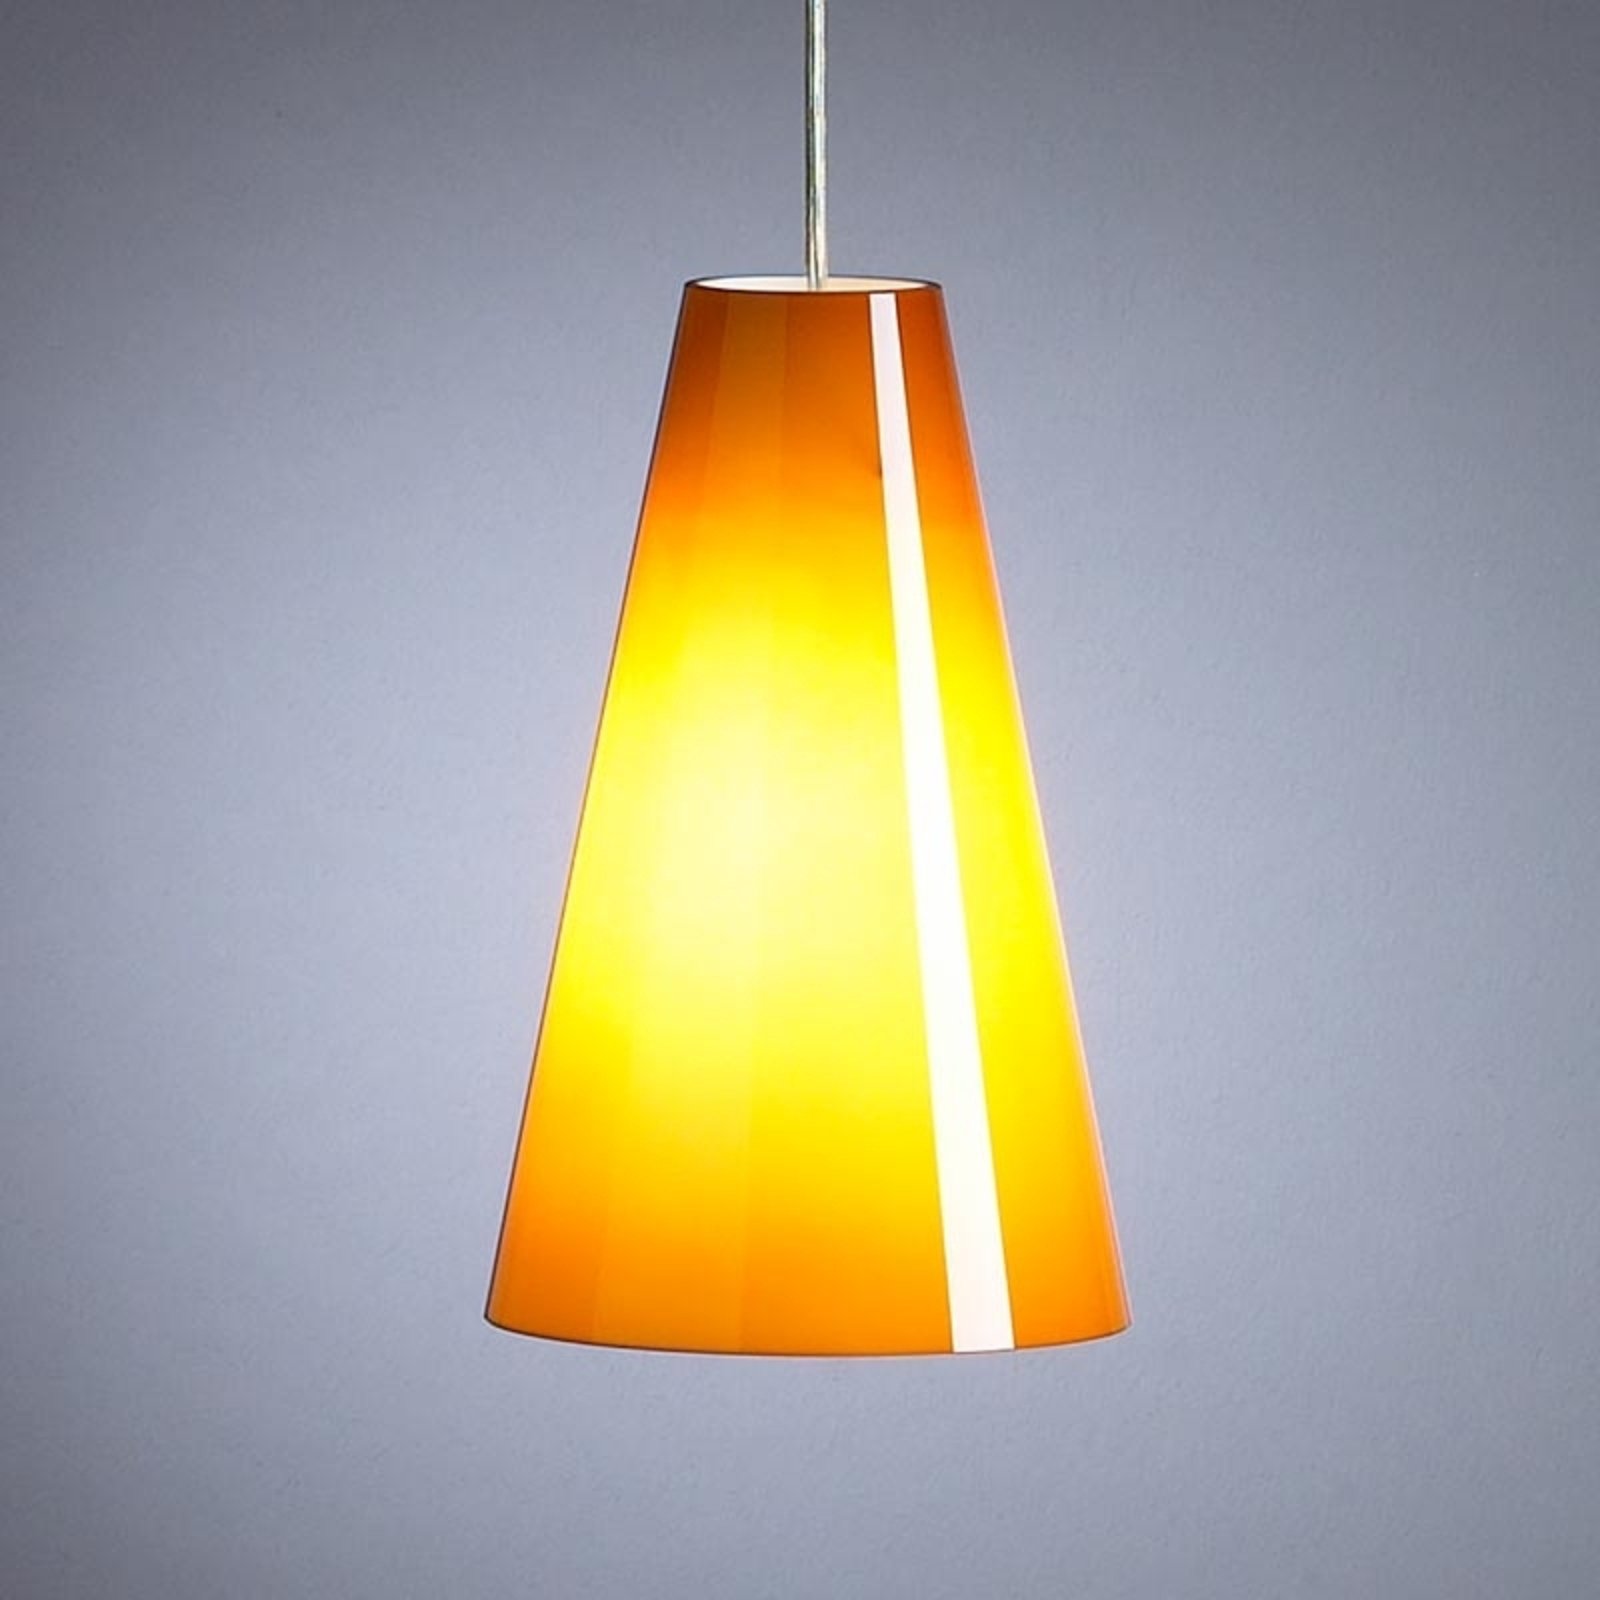 Hanging light by Schnepel, melon-coloured